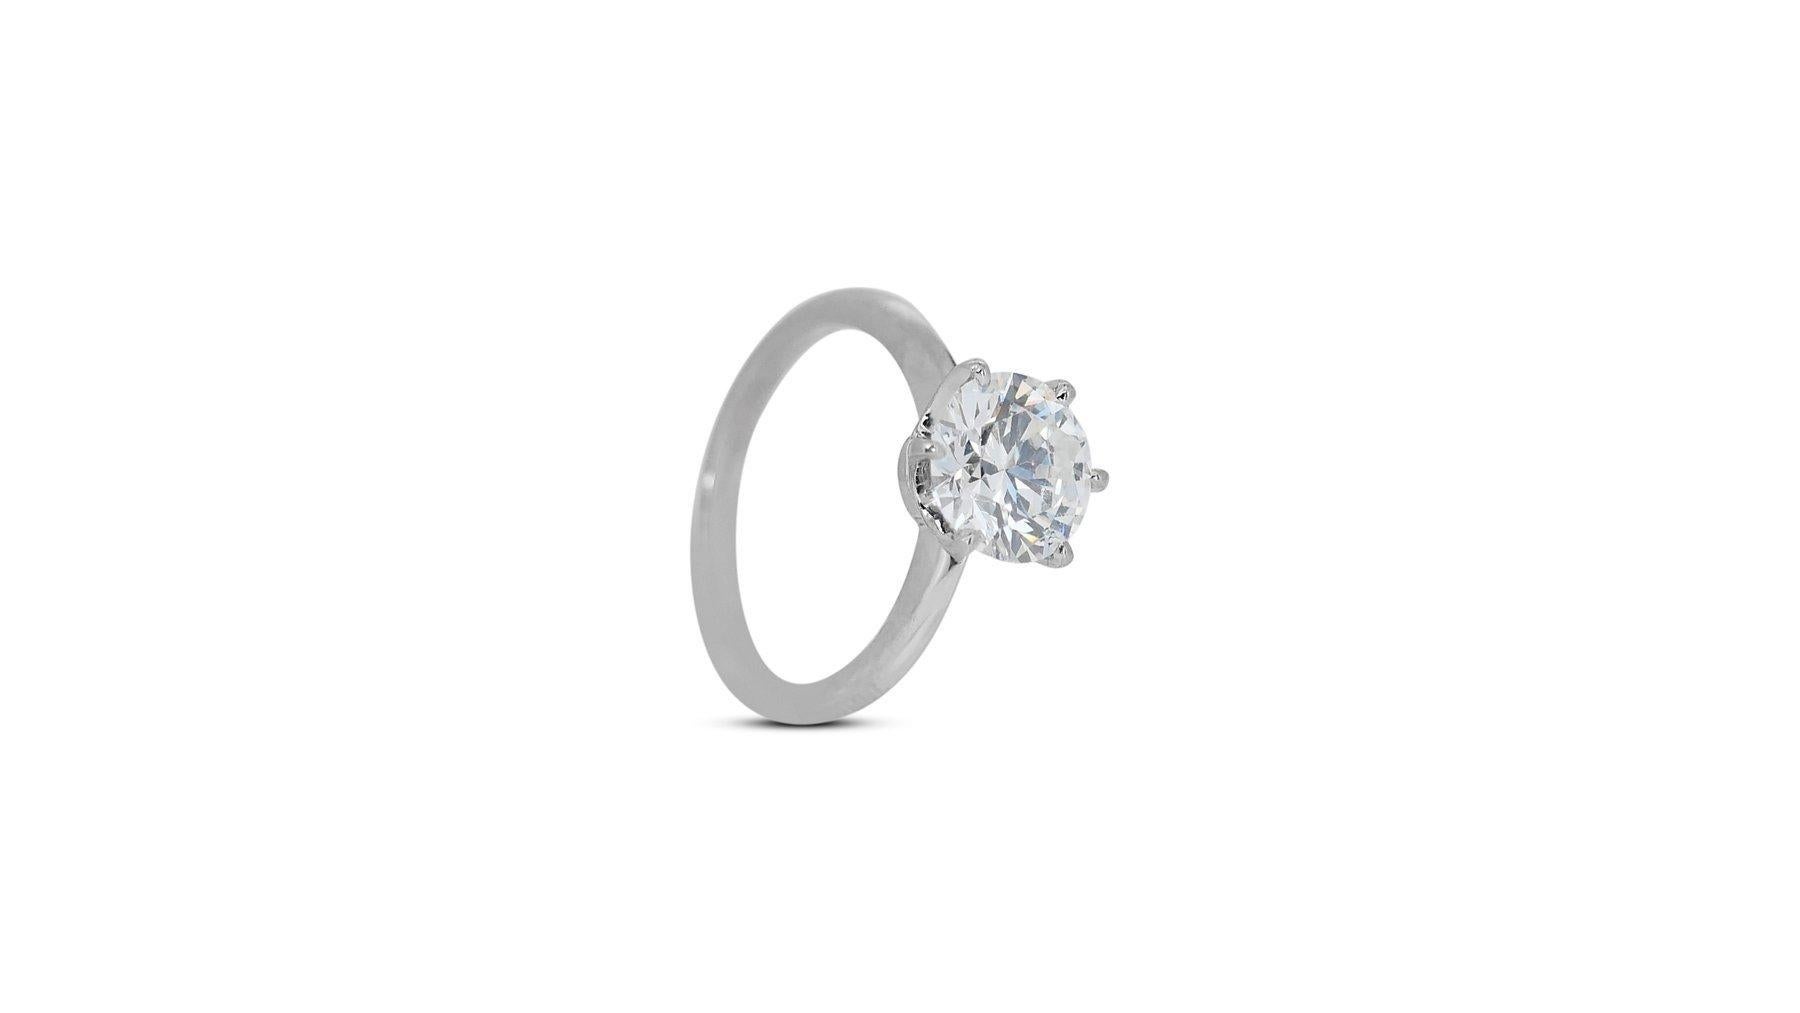 Taille ronde Timeless 3.09ct Diamond Solitaire Ring in 18k White Gold - GIA Certified (bague solitaire en or blanc 18 carats) en vente